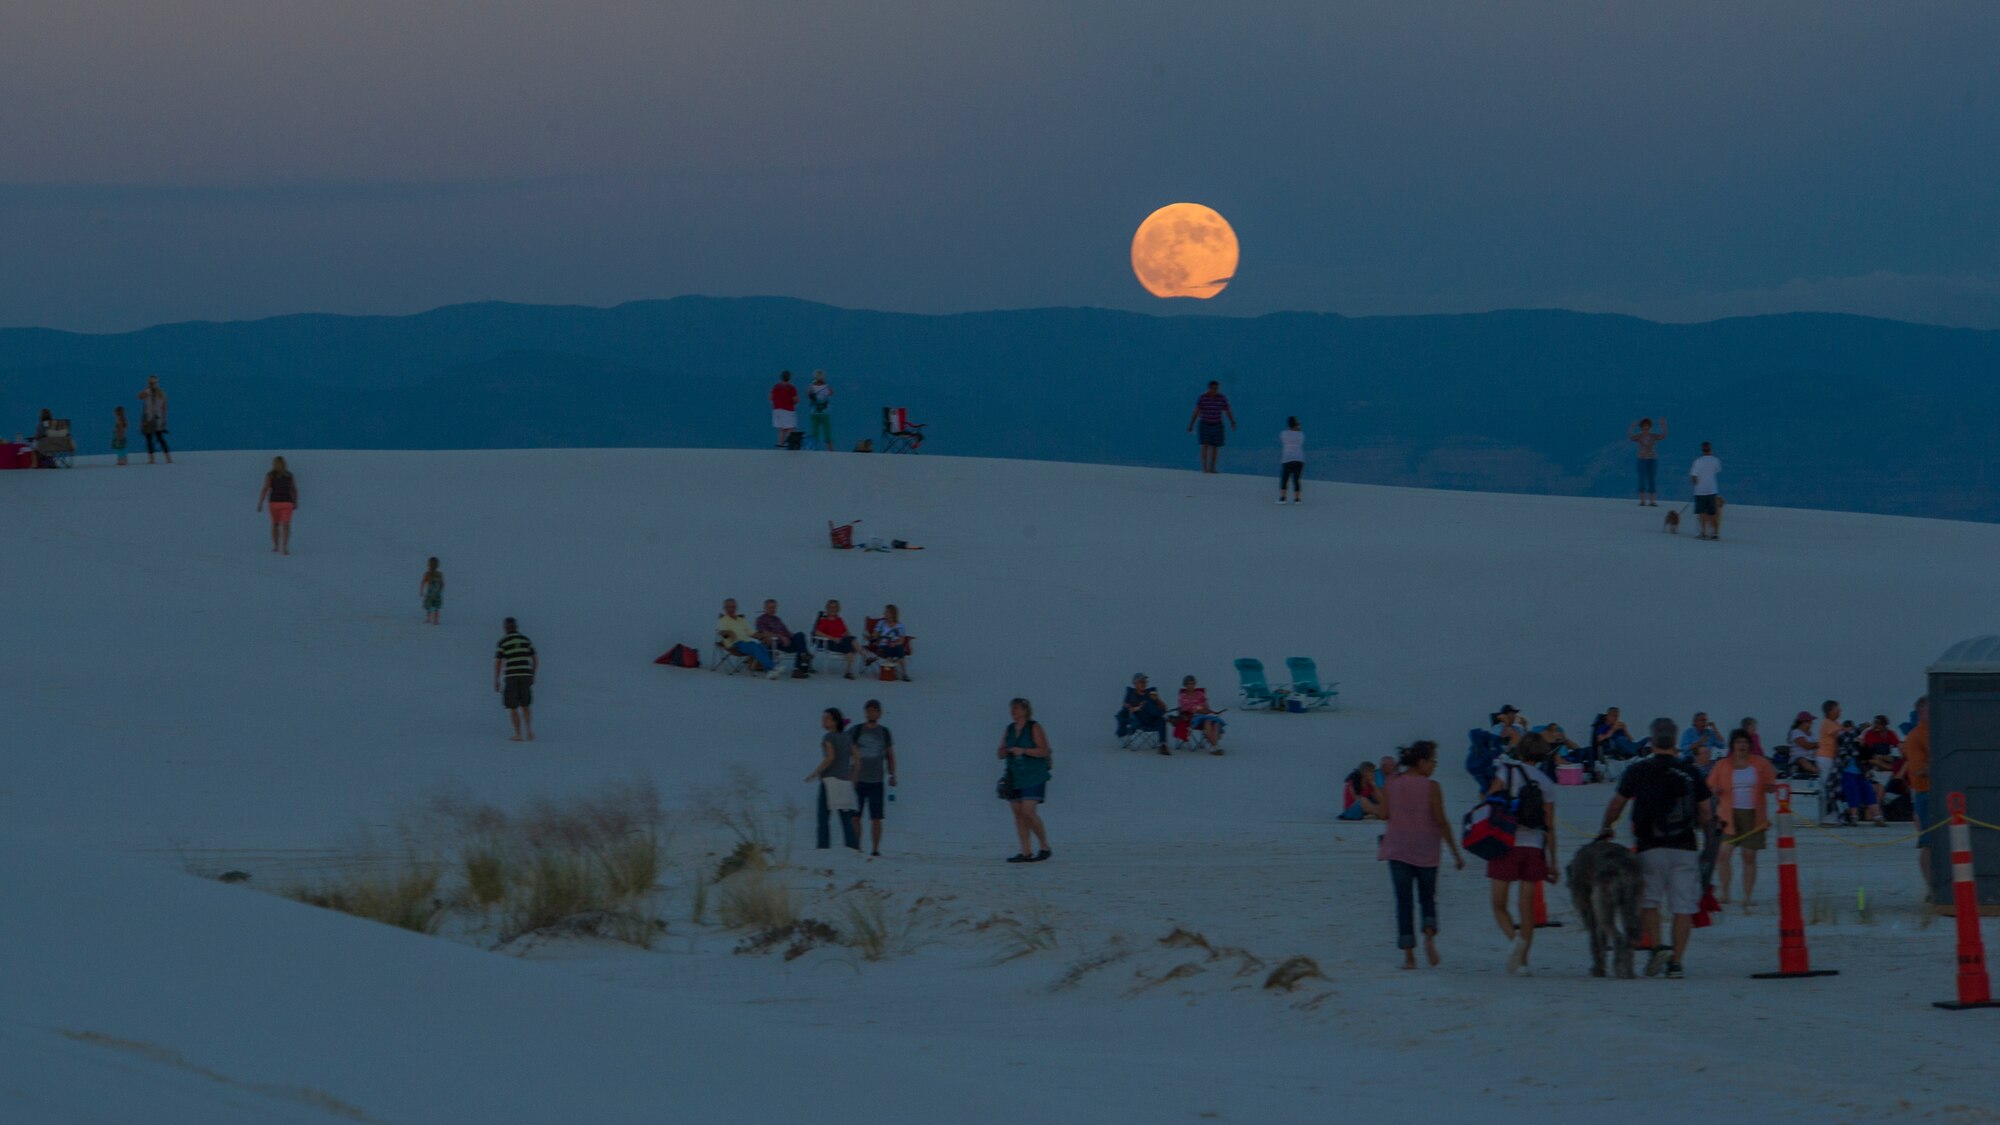 Residents of the Tularosa Basin prepare for the Full Moon Night event at White Sands National Monument, Sept. 8. White Sands National Monument hosts a monthly full moon night event where different guests and activities are planned for the guests to enjoy under a rising full moon. This month White Sands was host to Ernie Dogwolf Lovato, a musician, story teller and native New Mexican. (U.S. Air Force photo by Airman 1st Class Aaron Montoya / Released)